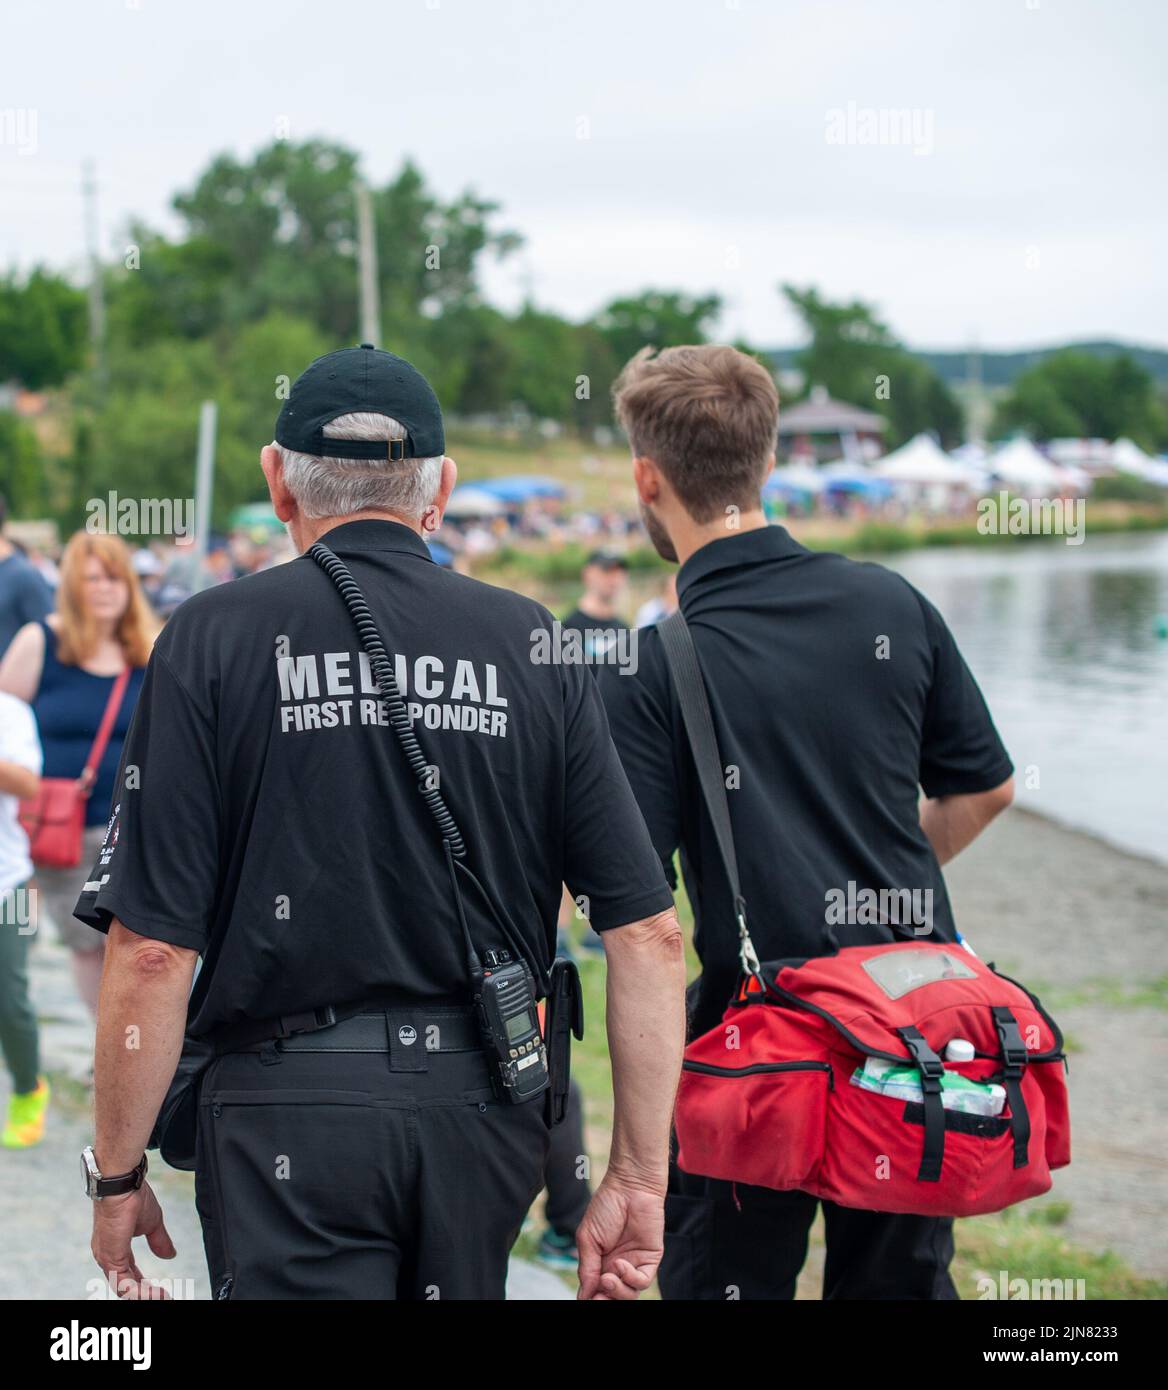 Two adult male medical first responders walking on a road among a crowd of people. Both are wearing black and grey colored paramedic uniforms. Stock Photo